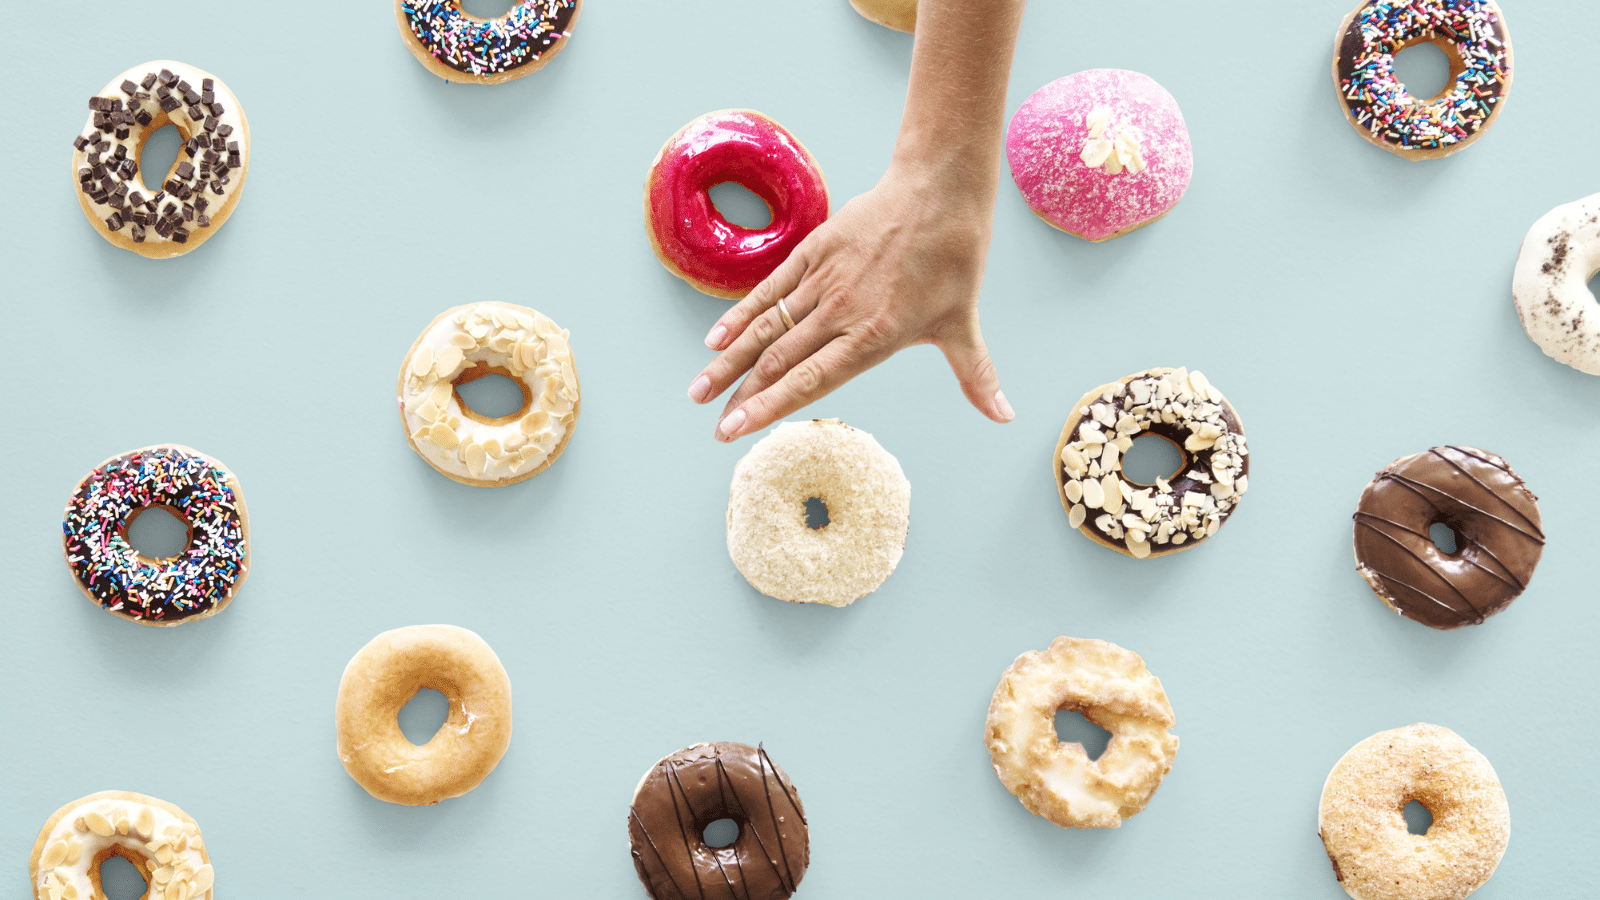 A hand reaching for donuts.